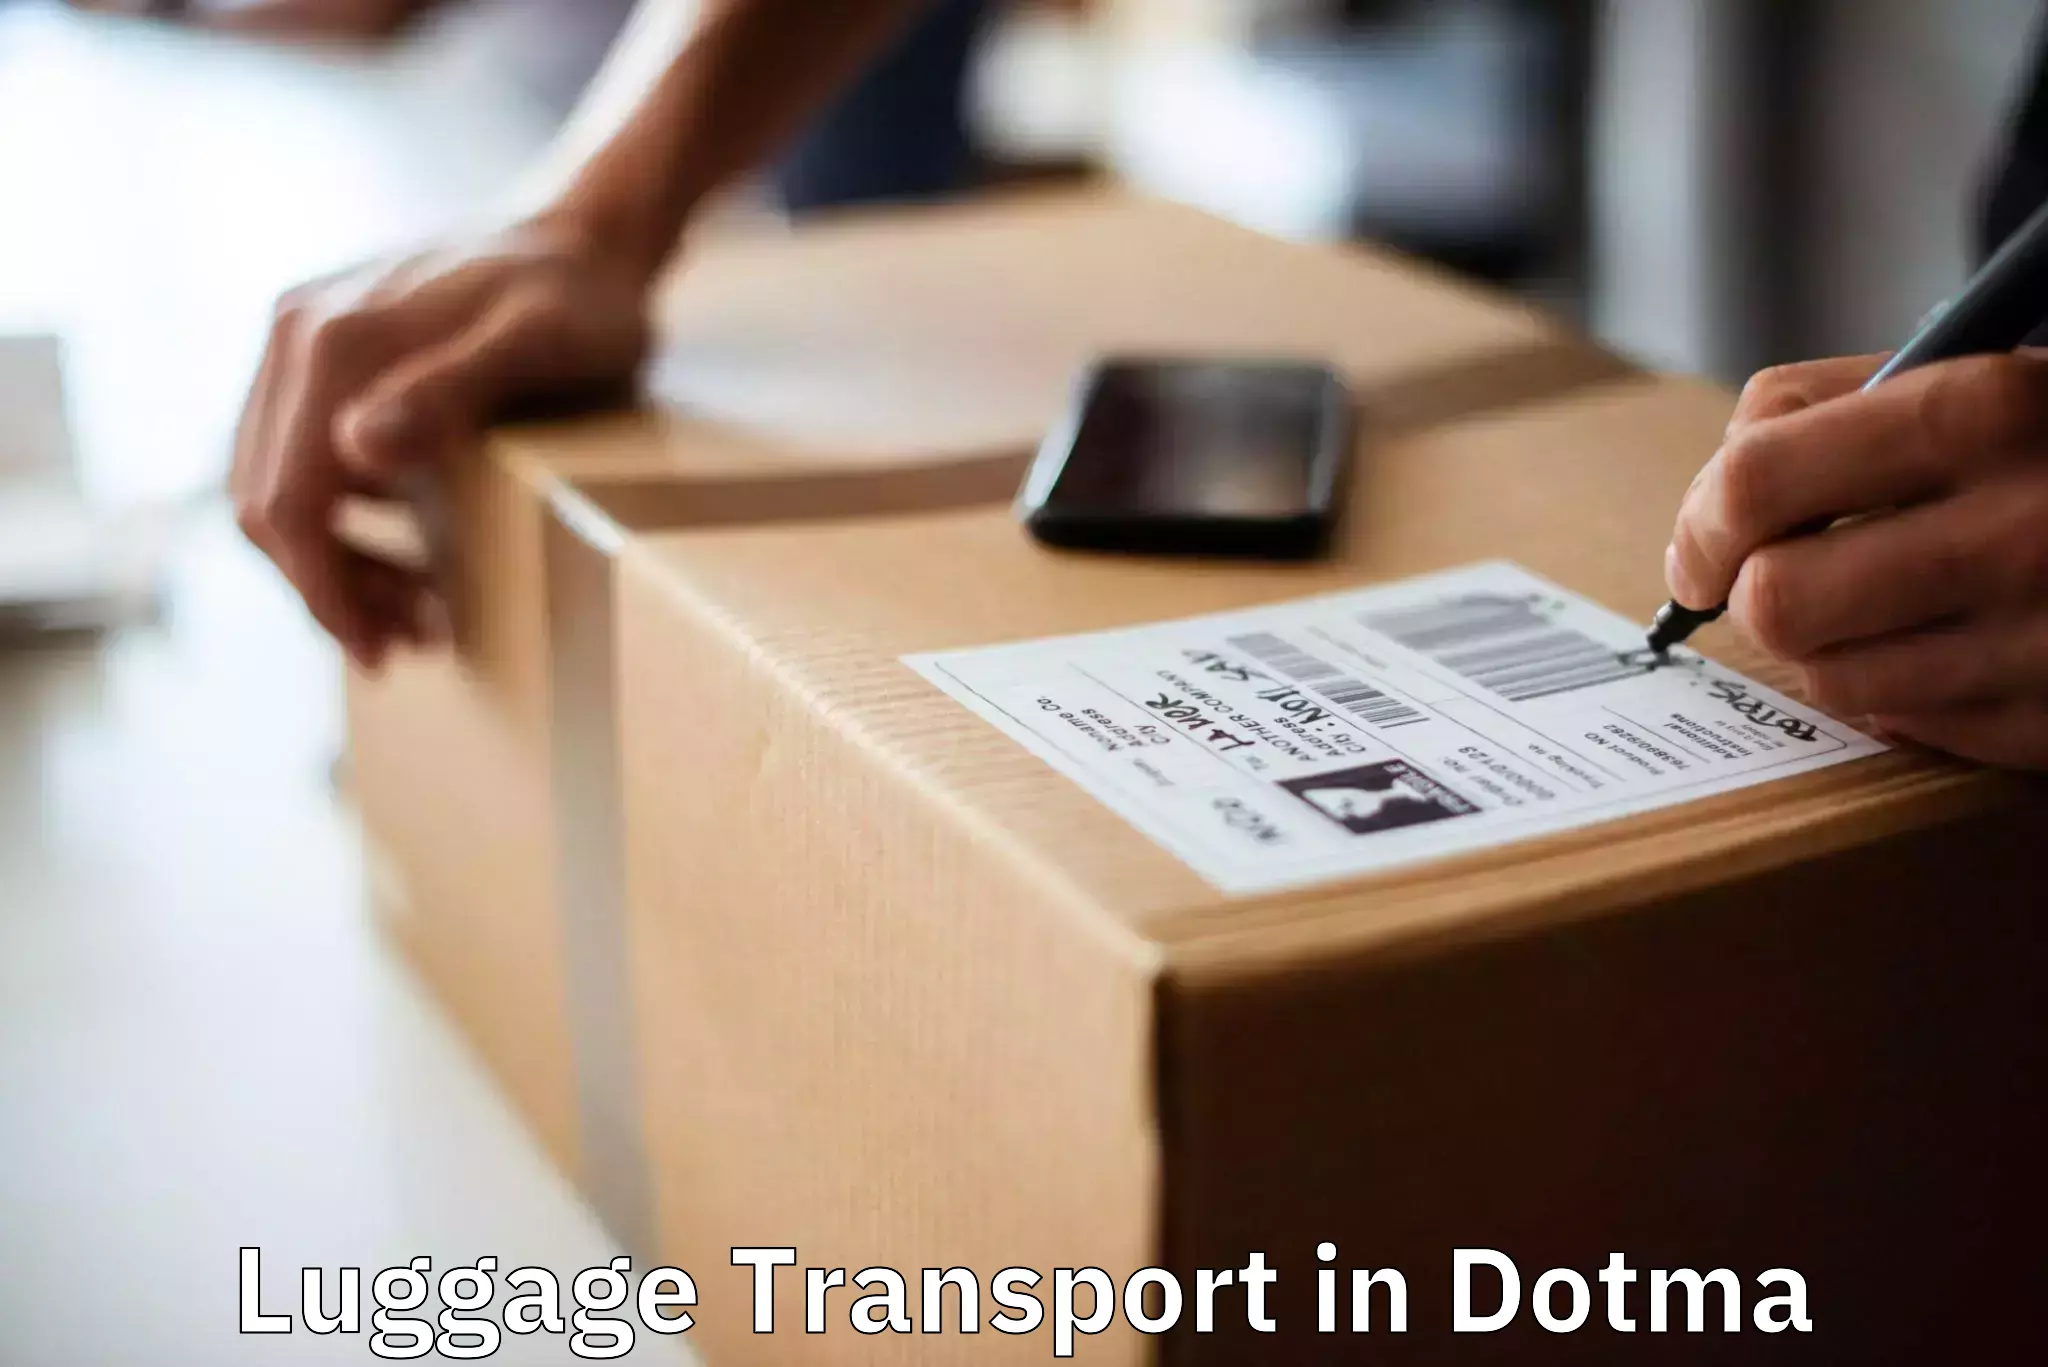 Luggage transport rates in Dotma